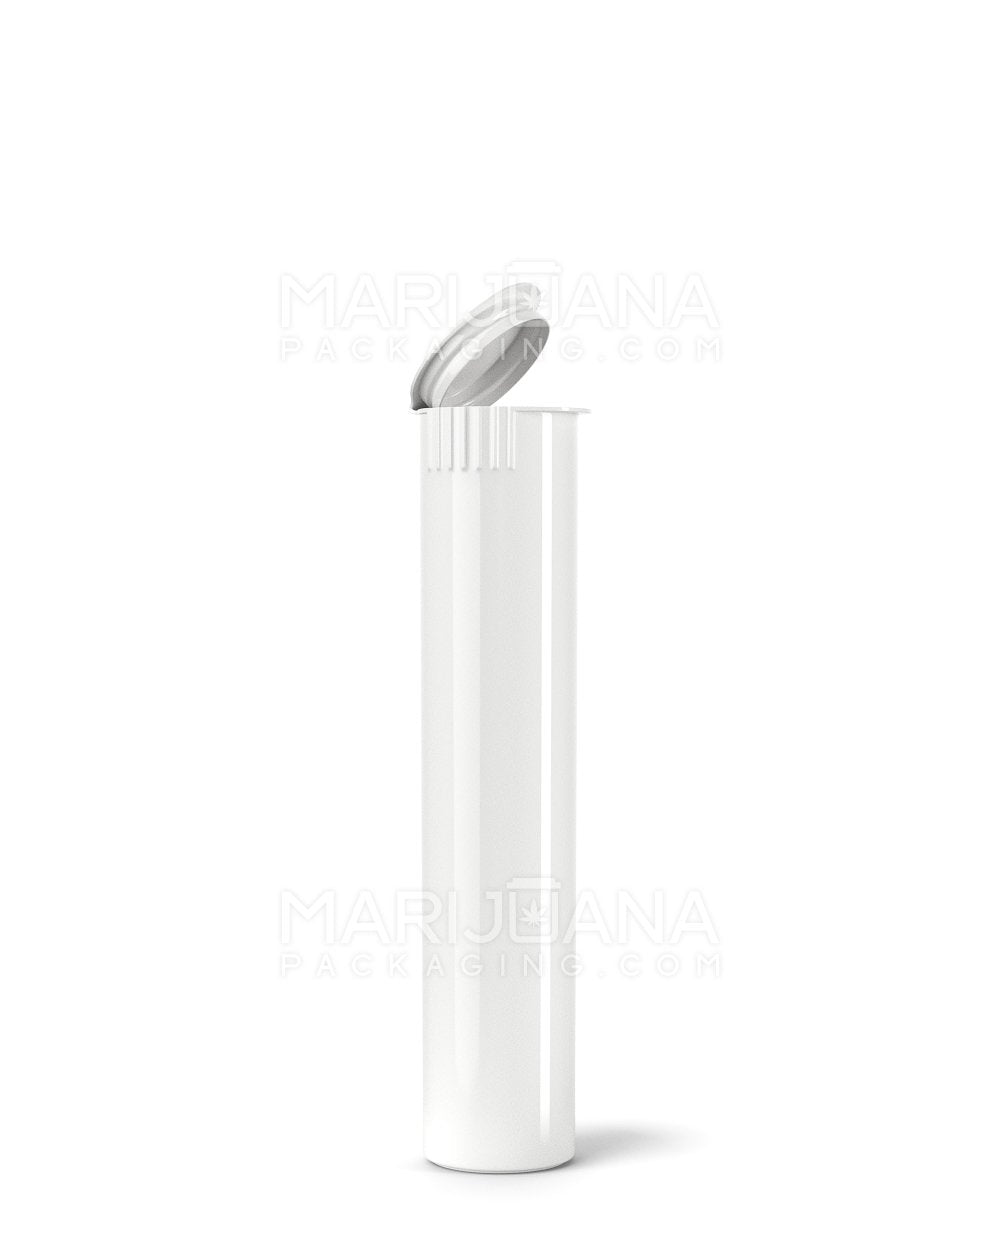 Child Resistant Pop Top Opaque Plastic Pre-Roll Tubes | 90mm - White | Sample - 1